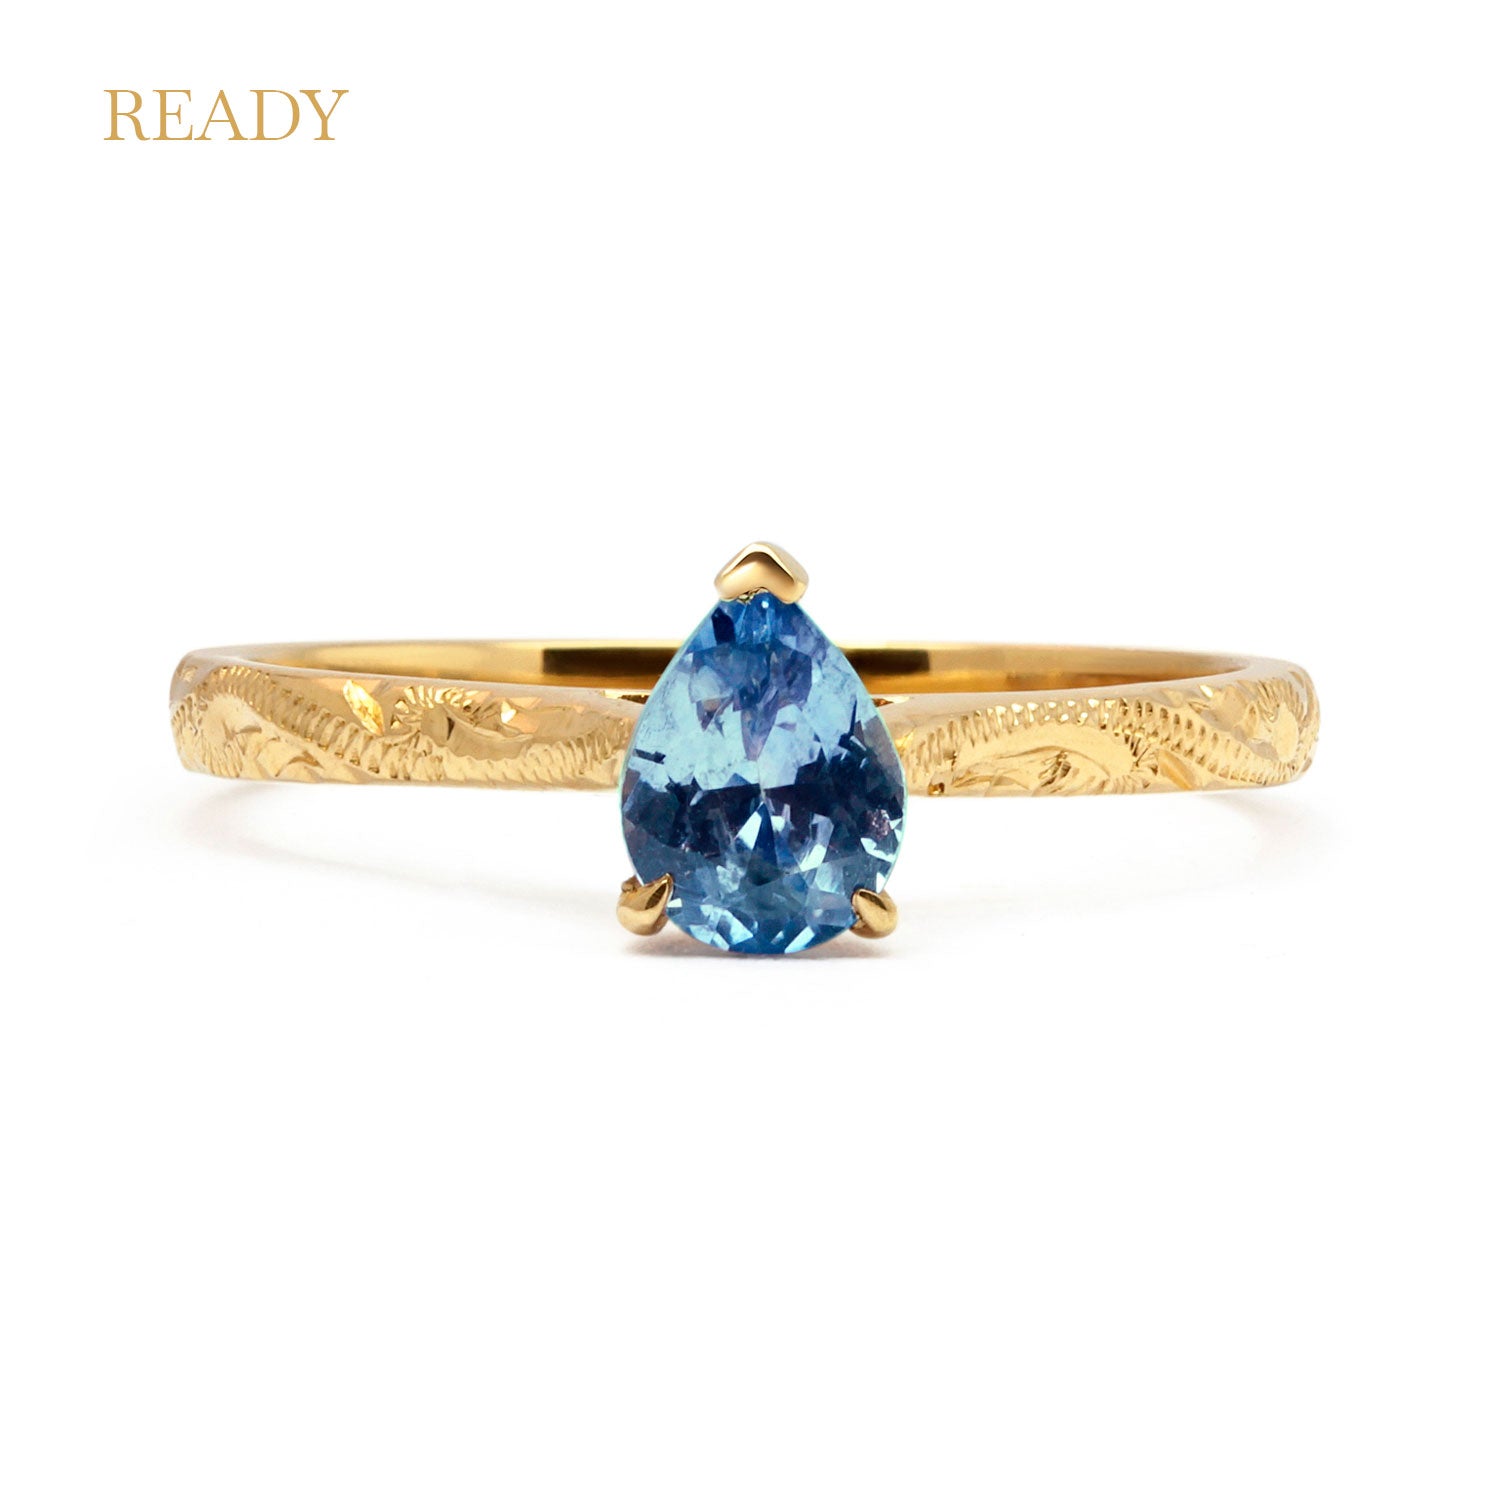 Fancy Athena ethical solitaire engagement ring in 18ct yellow artisanal Fairmined Ecological Gold, hand-engraved and set with a blue pear-cut sapphire of fair-traded and traceable Sri Lankan provenance